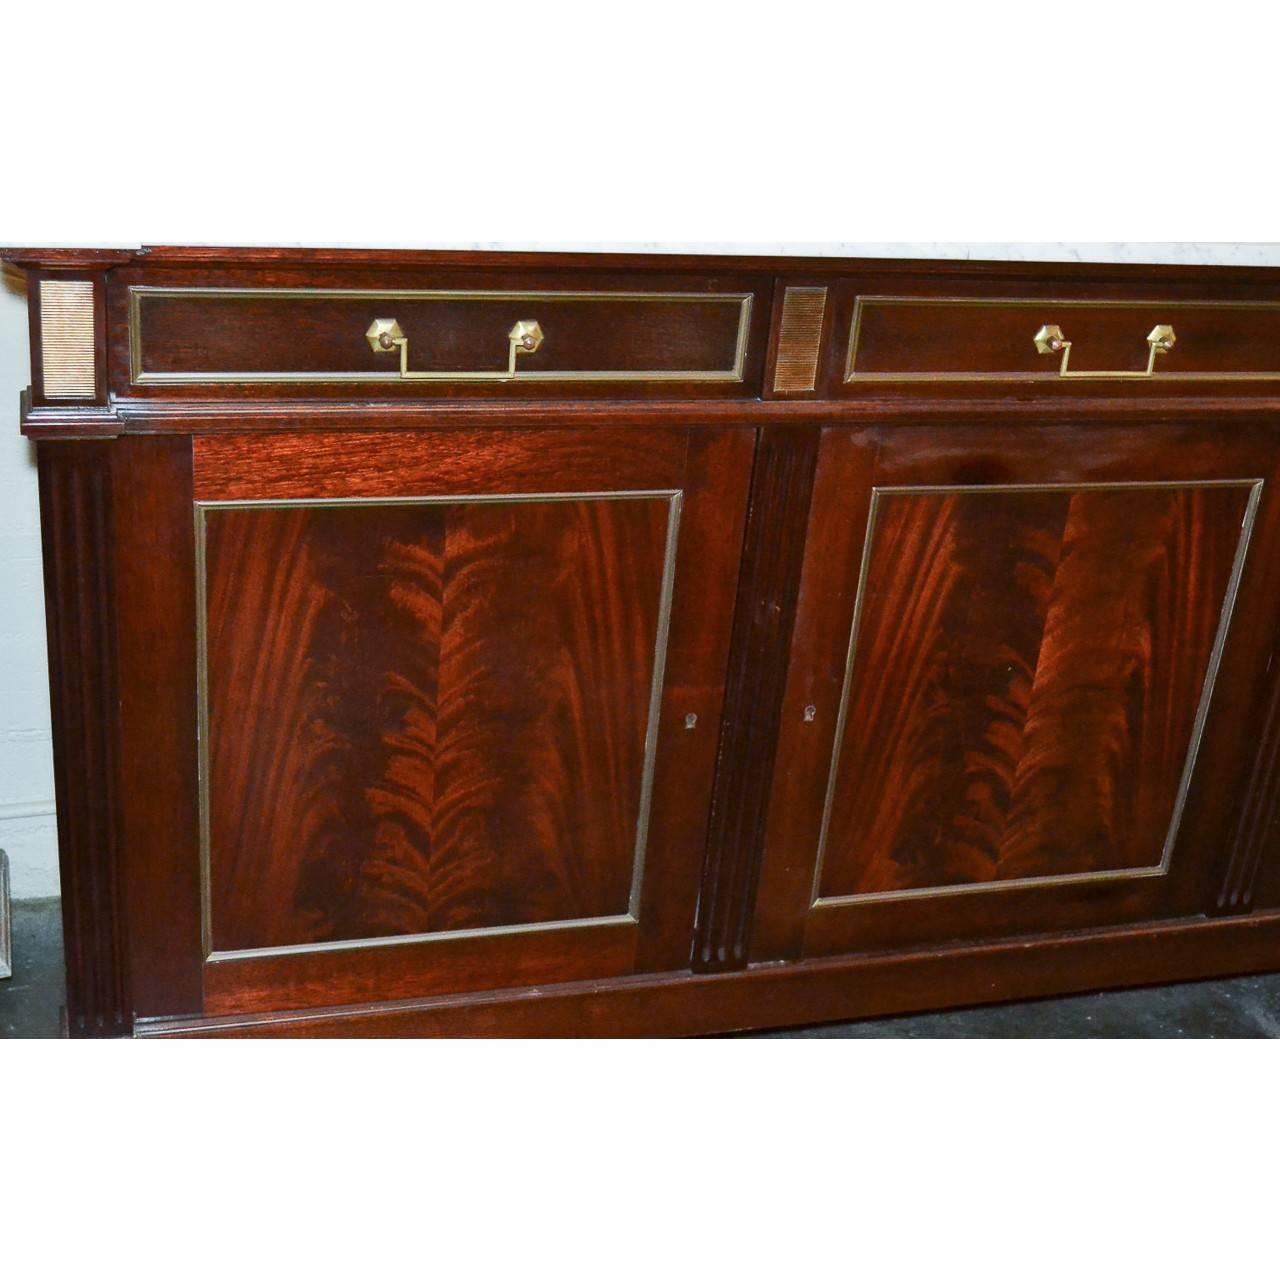 Fabulous French Jansen flame mahogany server or sideboard with a superb white Carrara marble top. The three drawer frieze with brass pulls, trim, and ribbed brass inlays above three cupboard doors. The entire resting on turned and tapered